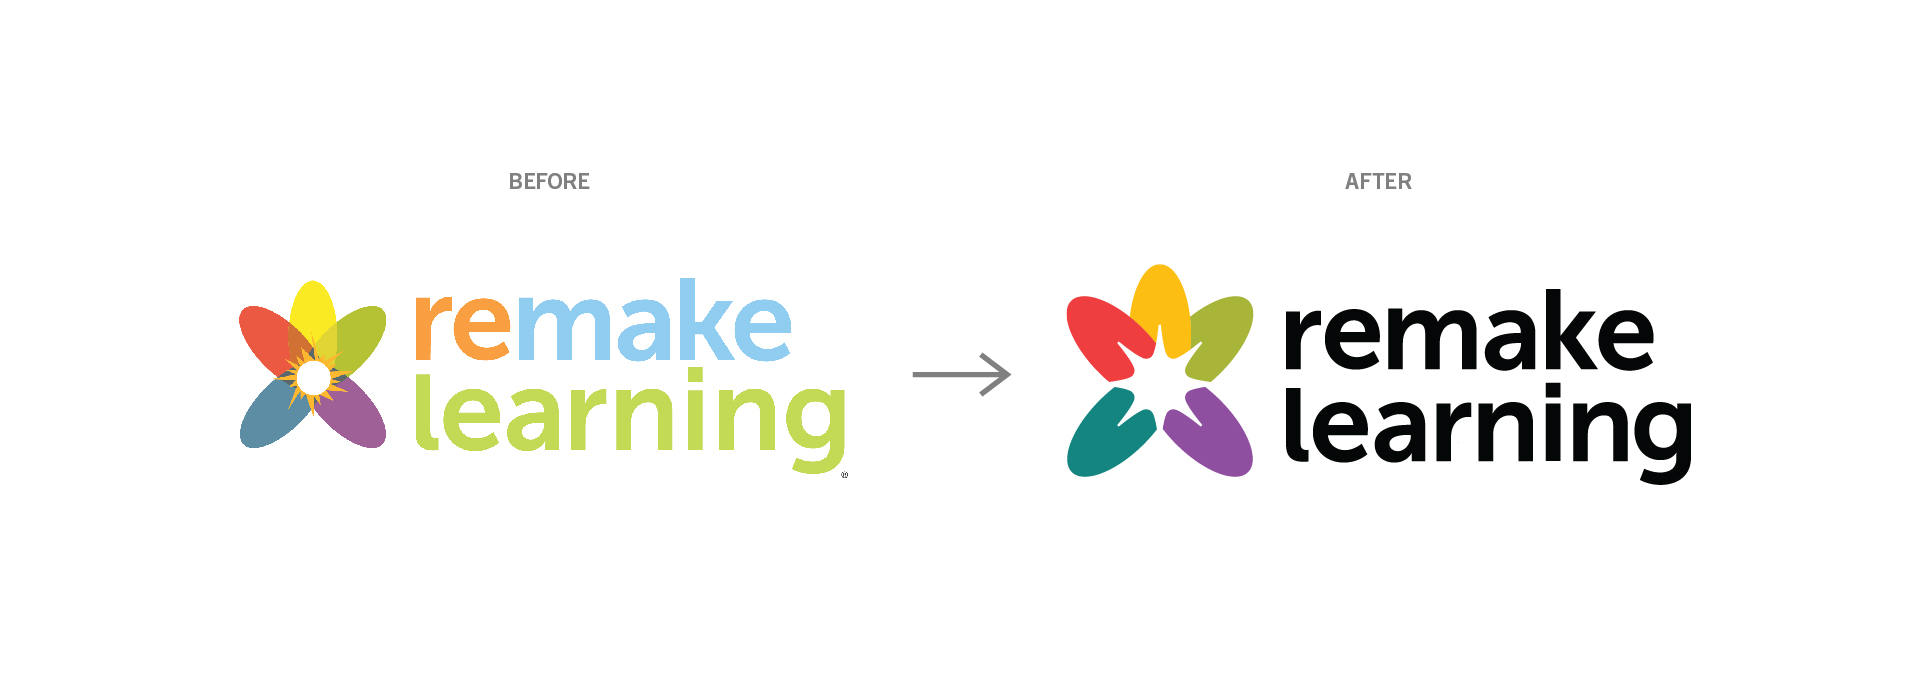 Remake Learning logo, before and after